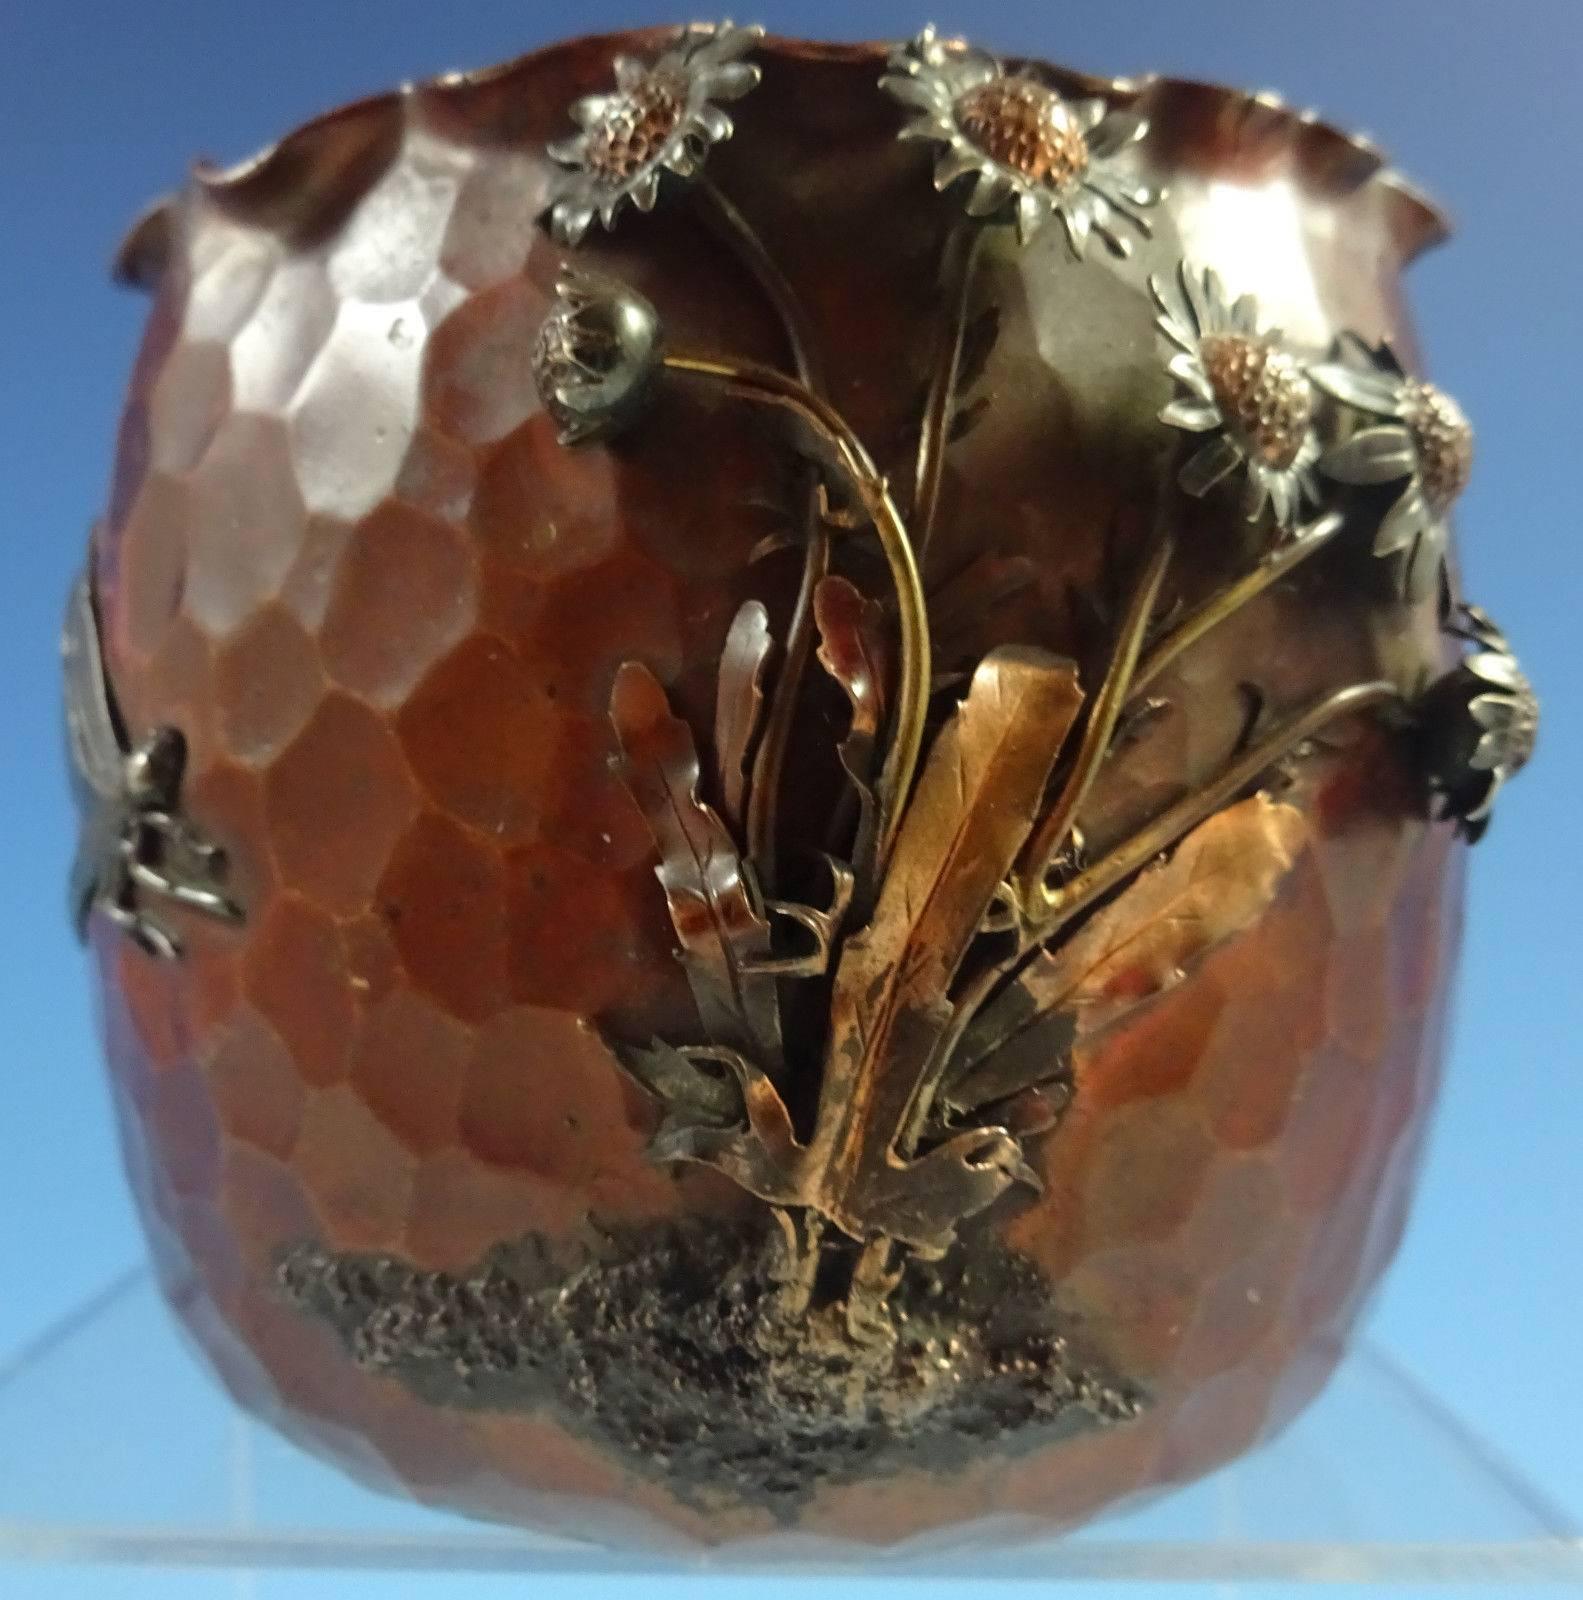 Stunning Gorham mixed metals vase made with sterling silver applied on copper. The piece has a silver dragonfly and applied copper, silver, and gold 3-D flowers. The vase dates from 1880, and it measures 3 1/2" x 3 3/4".

This piece is not